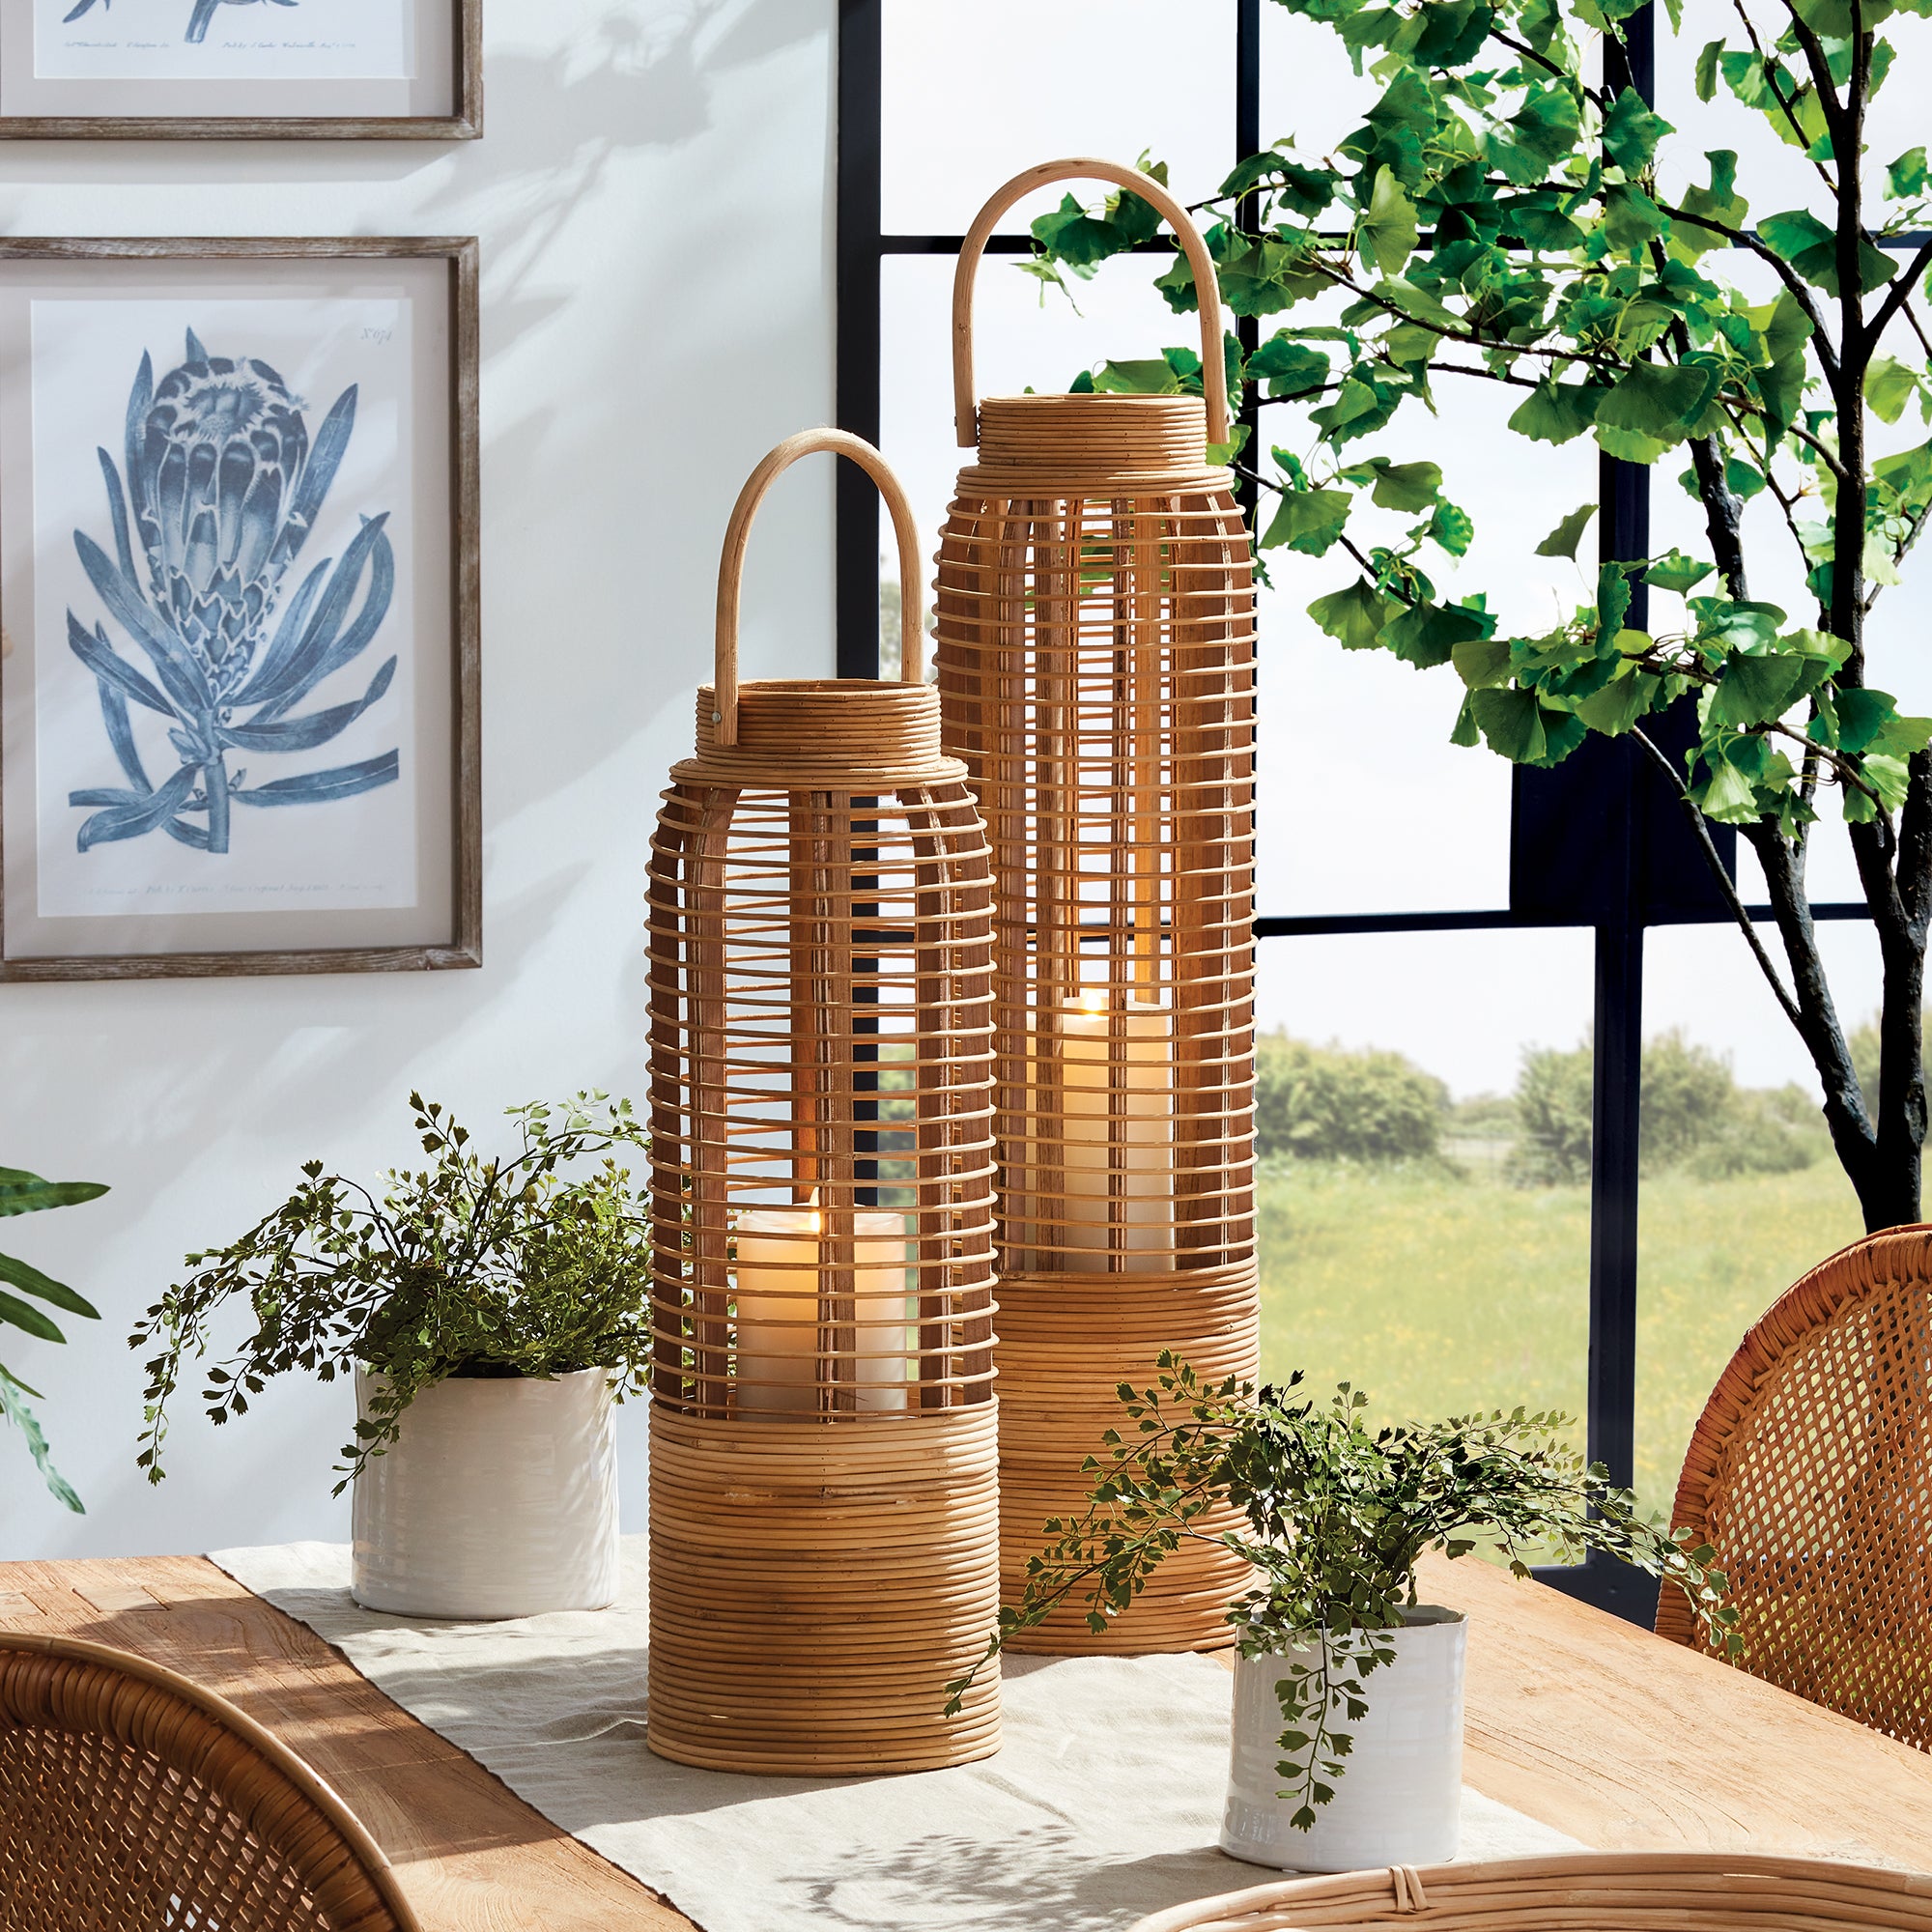 With a tall and slender rattan body, this large scale lantern really makes a statement. At home in the coastal setting or anywhere needing a touch of nature. Amethyst Home provides interior design, new construction, custom furniture, and area rugs in the Salt Lake City metro area.